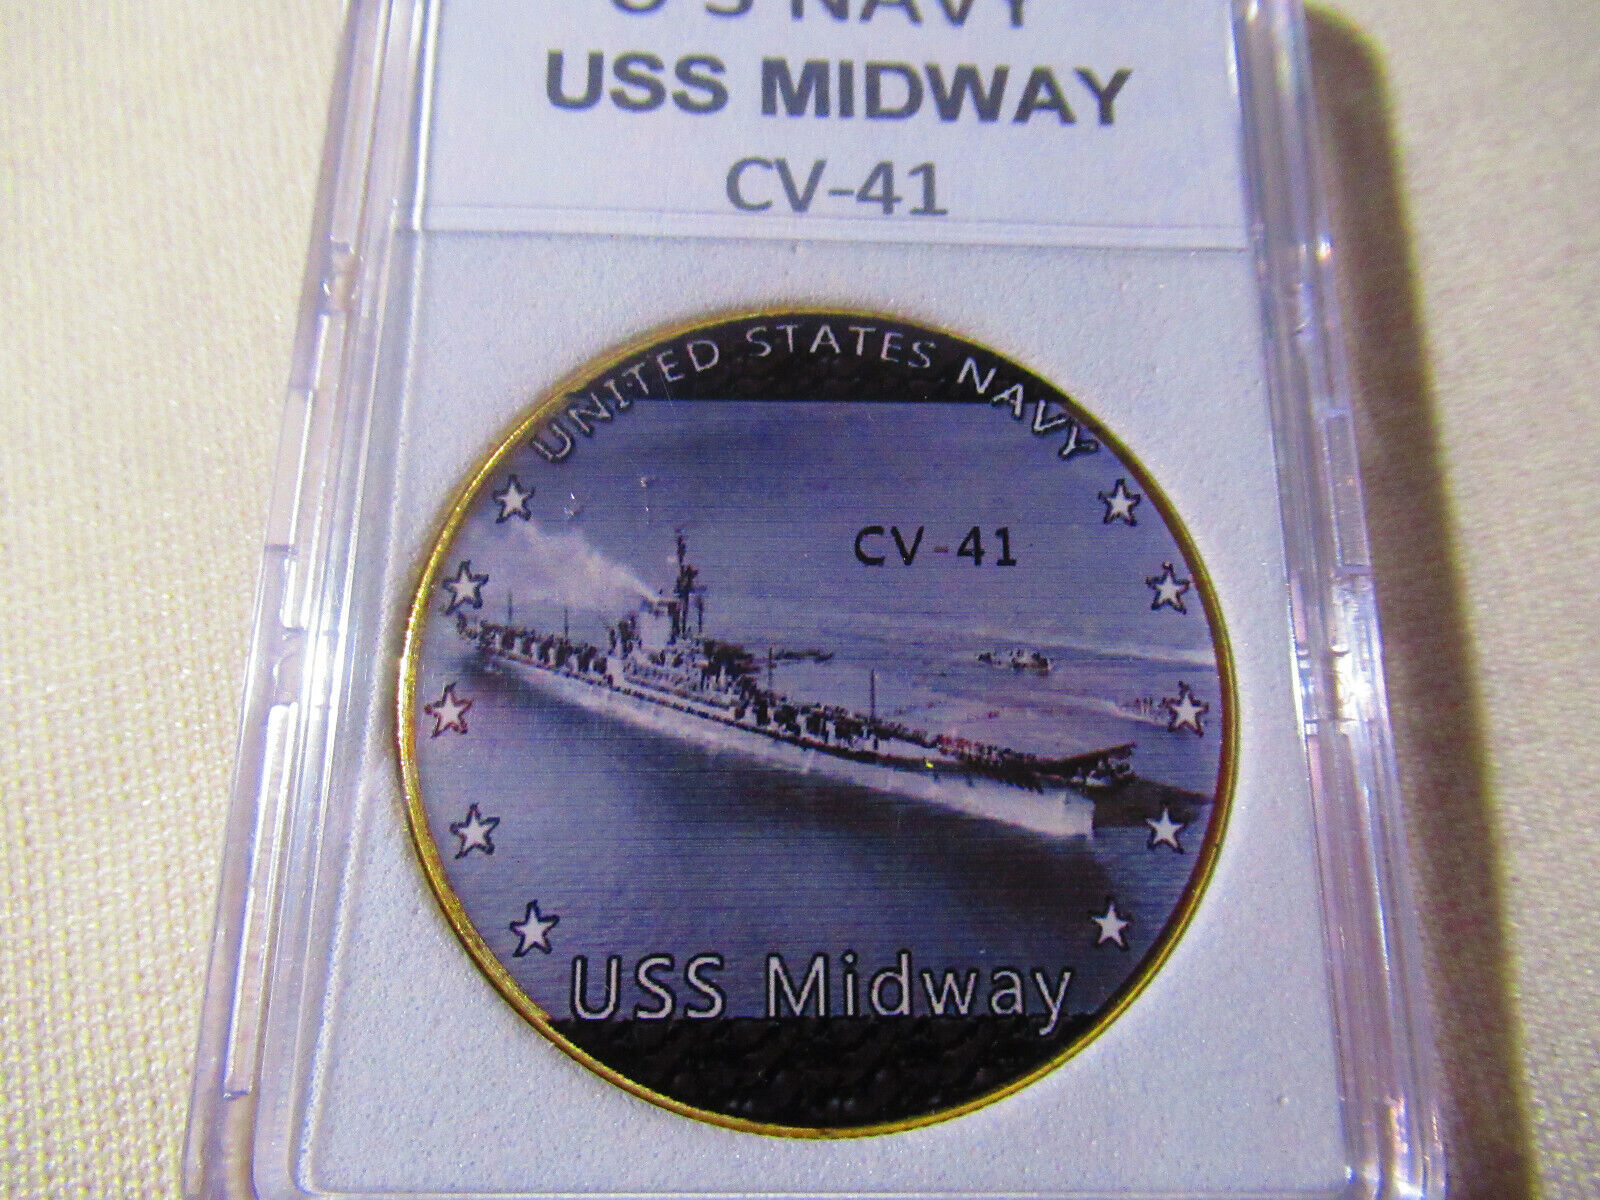 US NAVY - USS MIDWAY CV-41 Challenge Coin